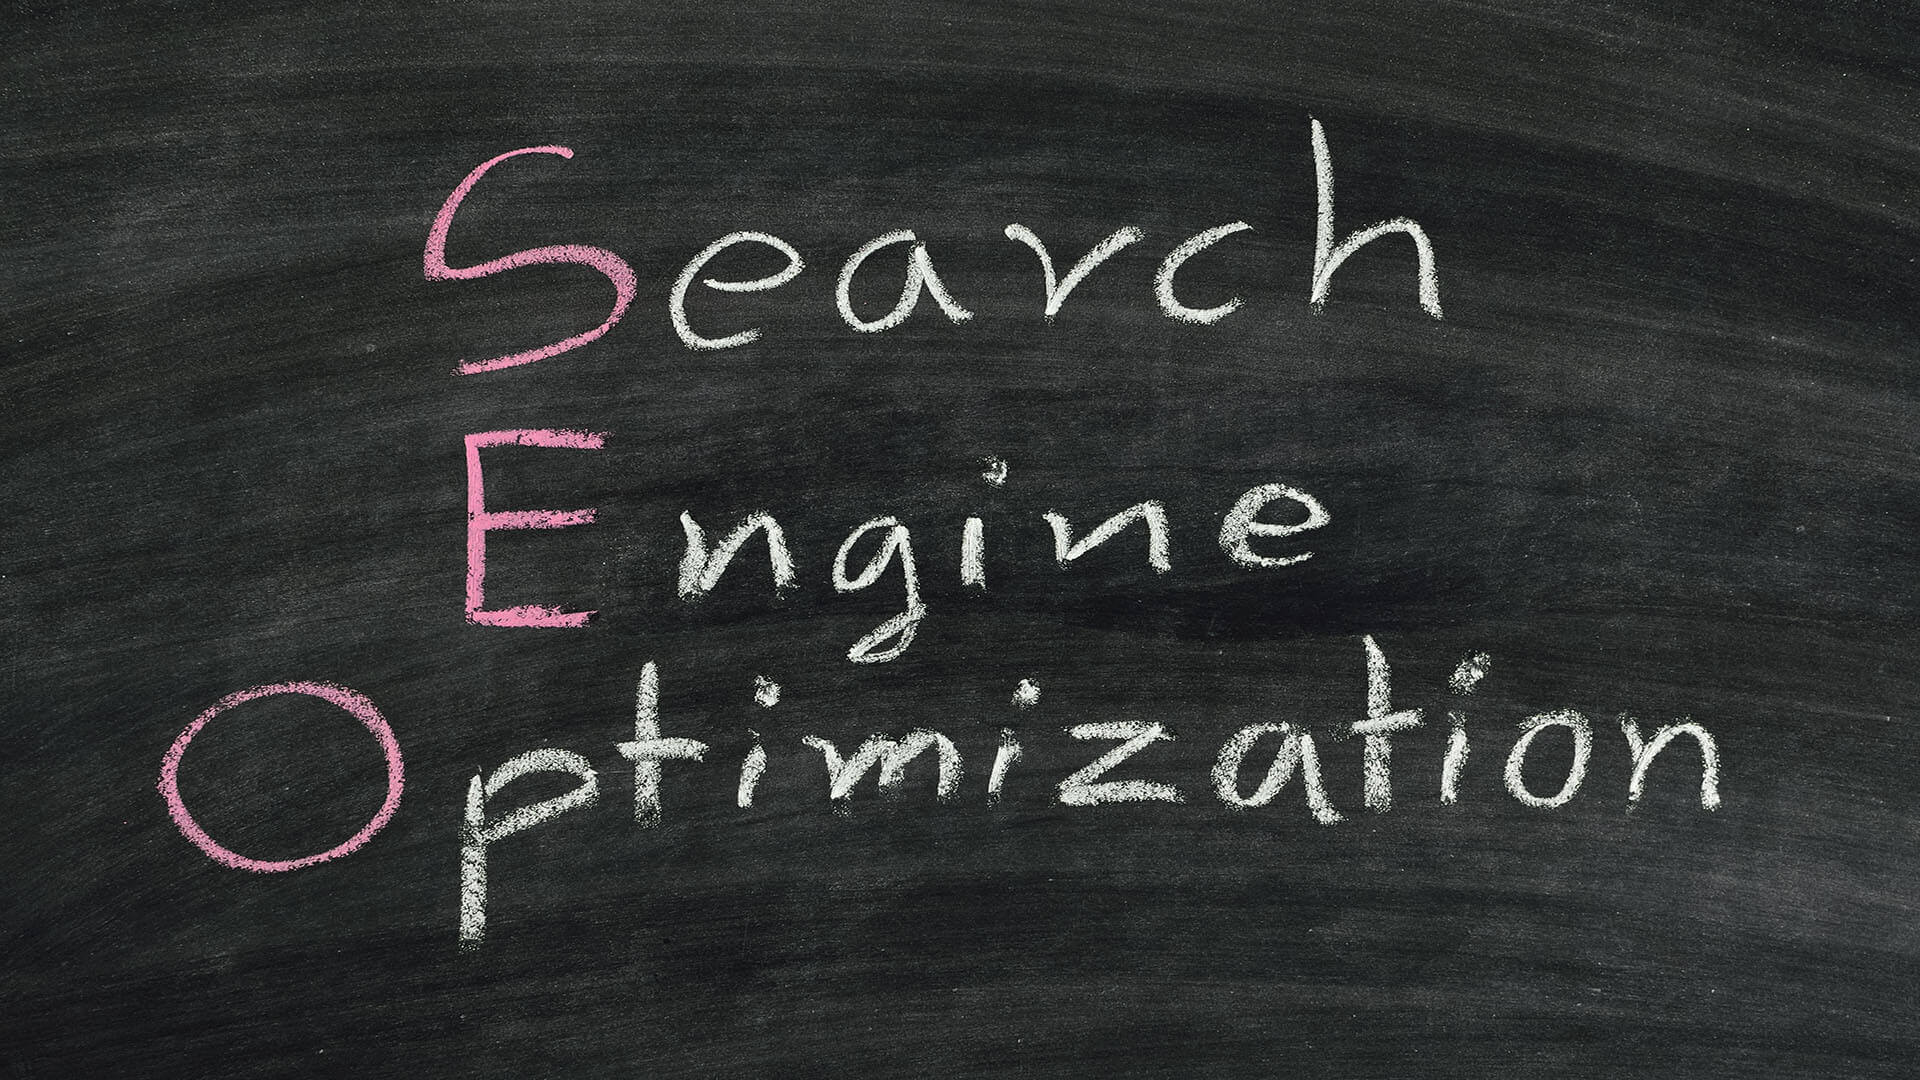 Frequently asked questions on search engine optimization